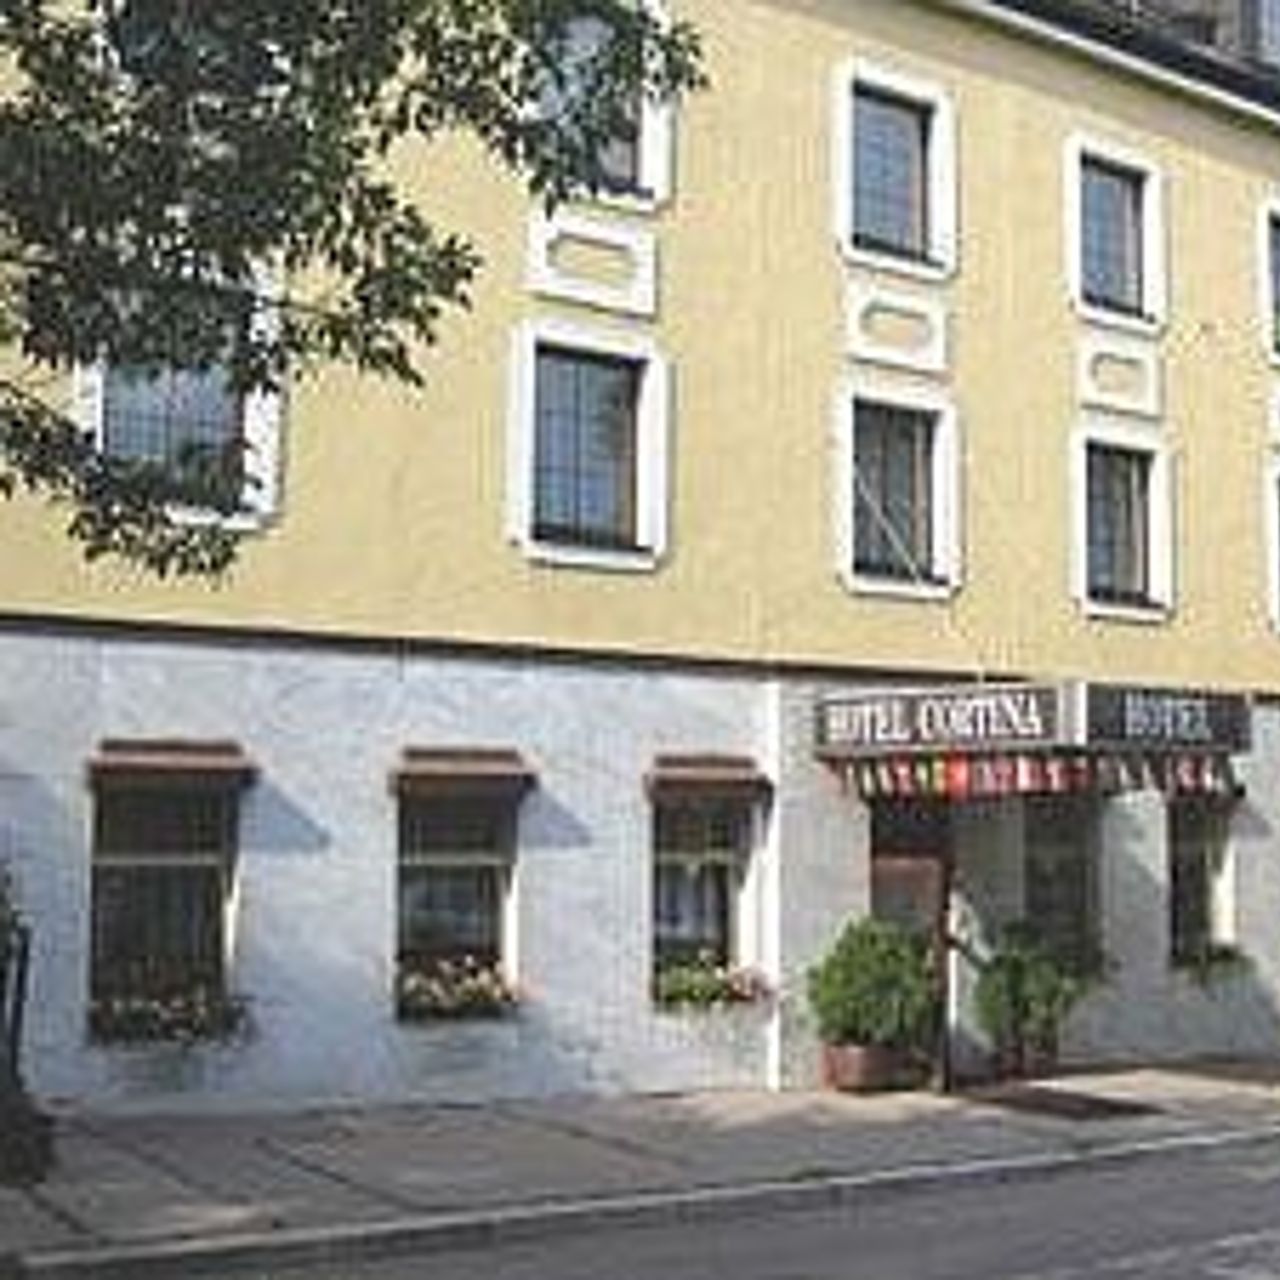 Hotel Cortina - Vienna - Great prices at HOTEL INFO